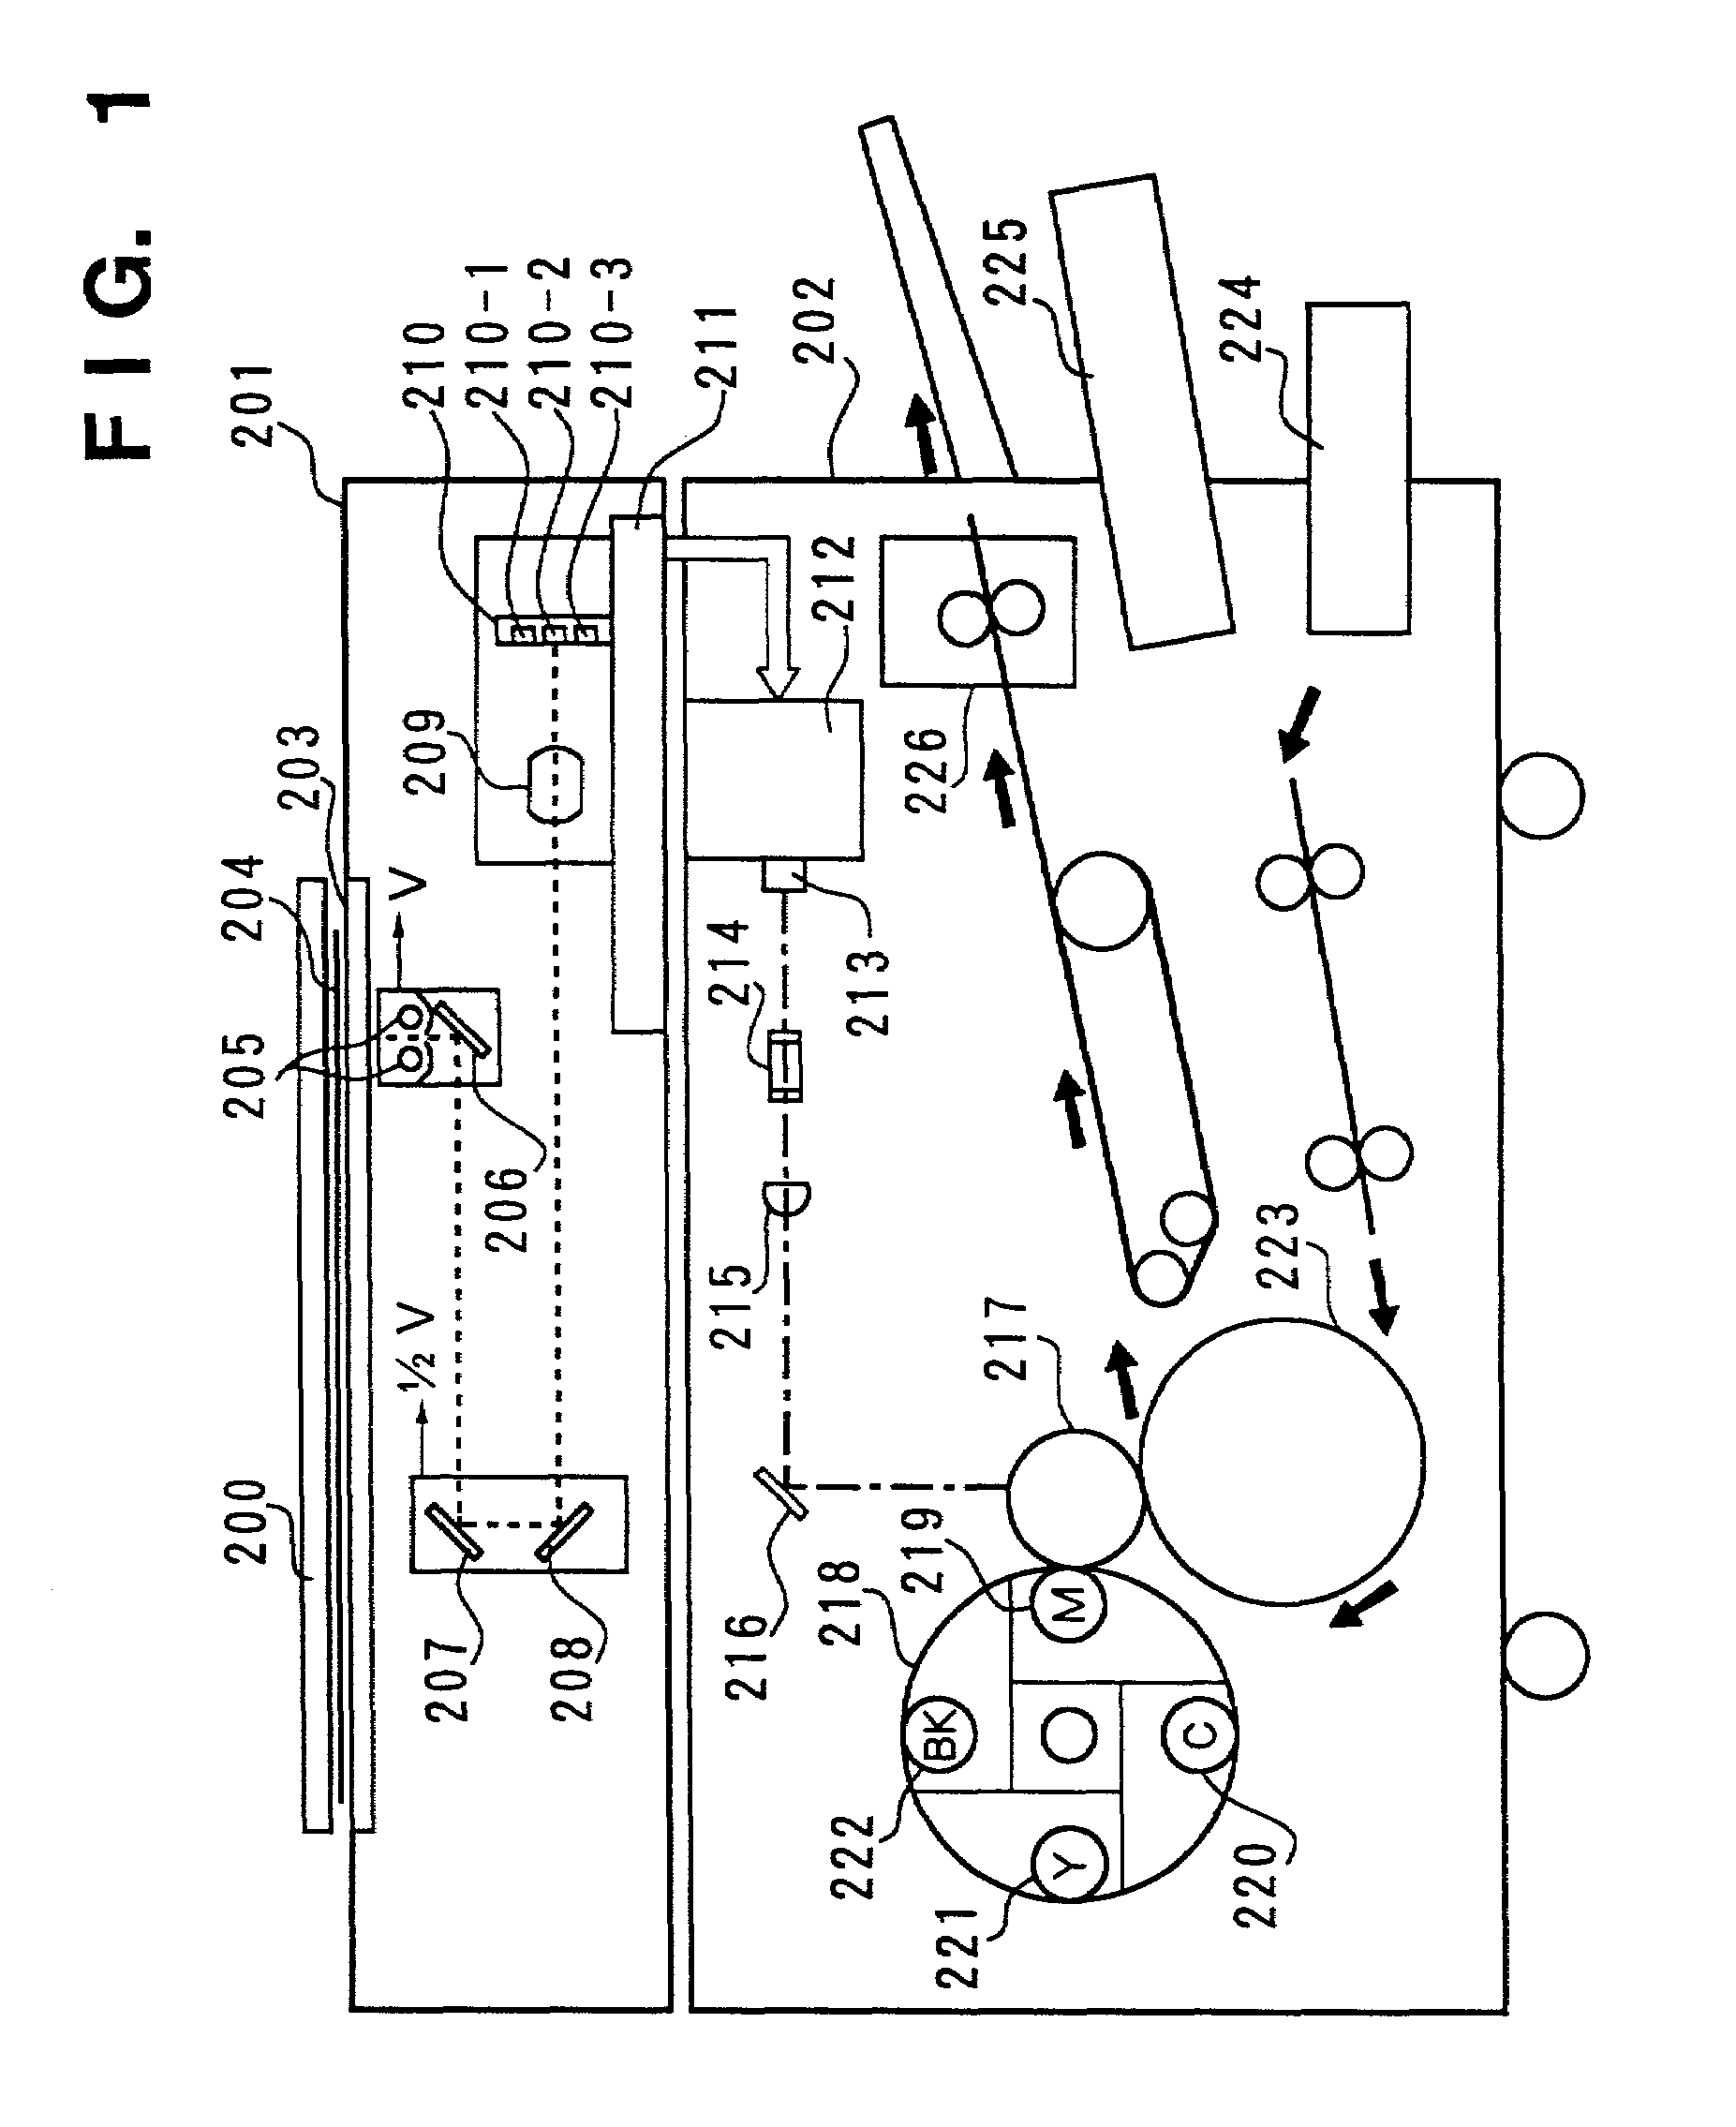 Image processing apparatus and method using image information and additional information or an additional pattern added thereto or superposed thereon